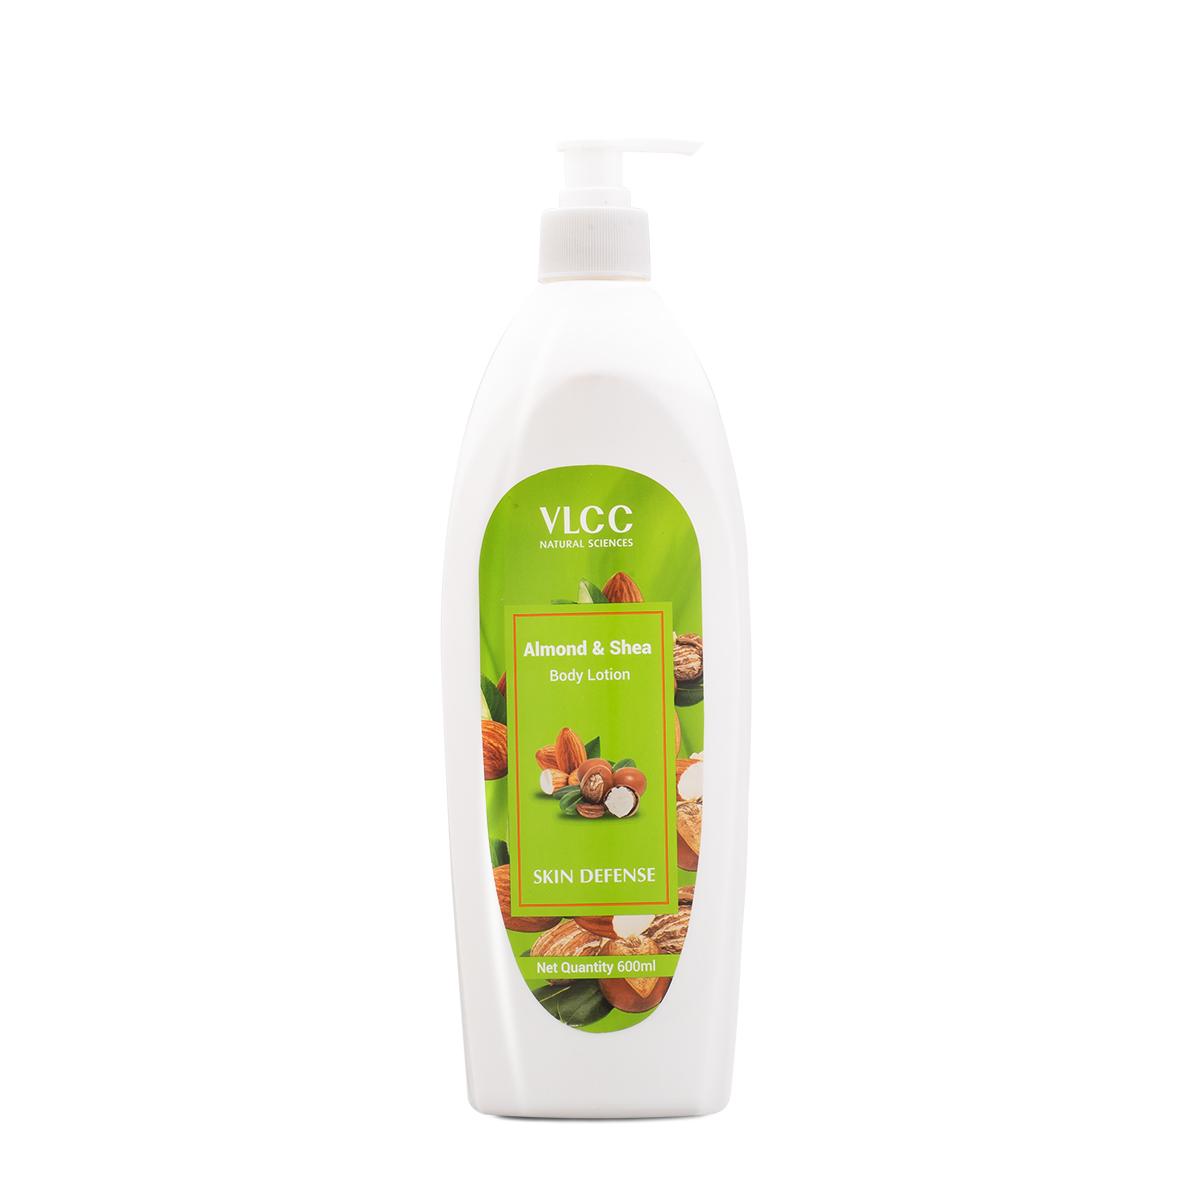 VLCC Almond and Shea Body Lotion - Embrace Softness and Radiance